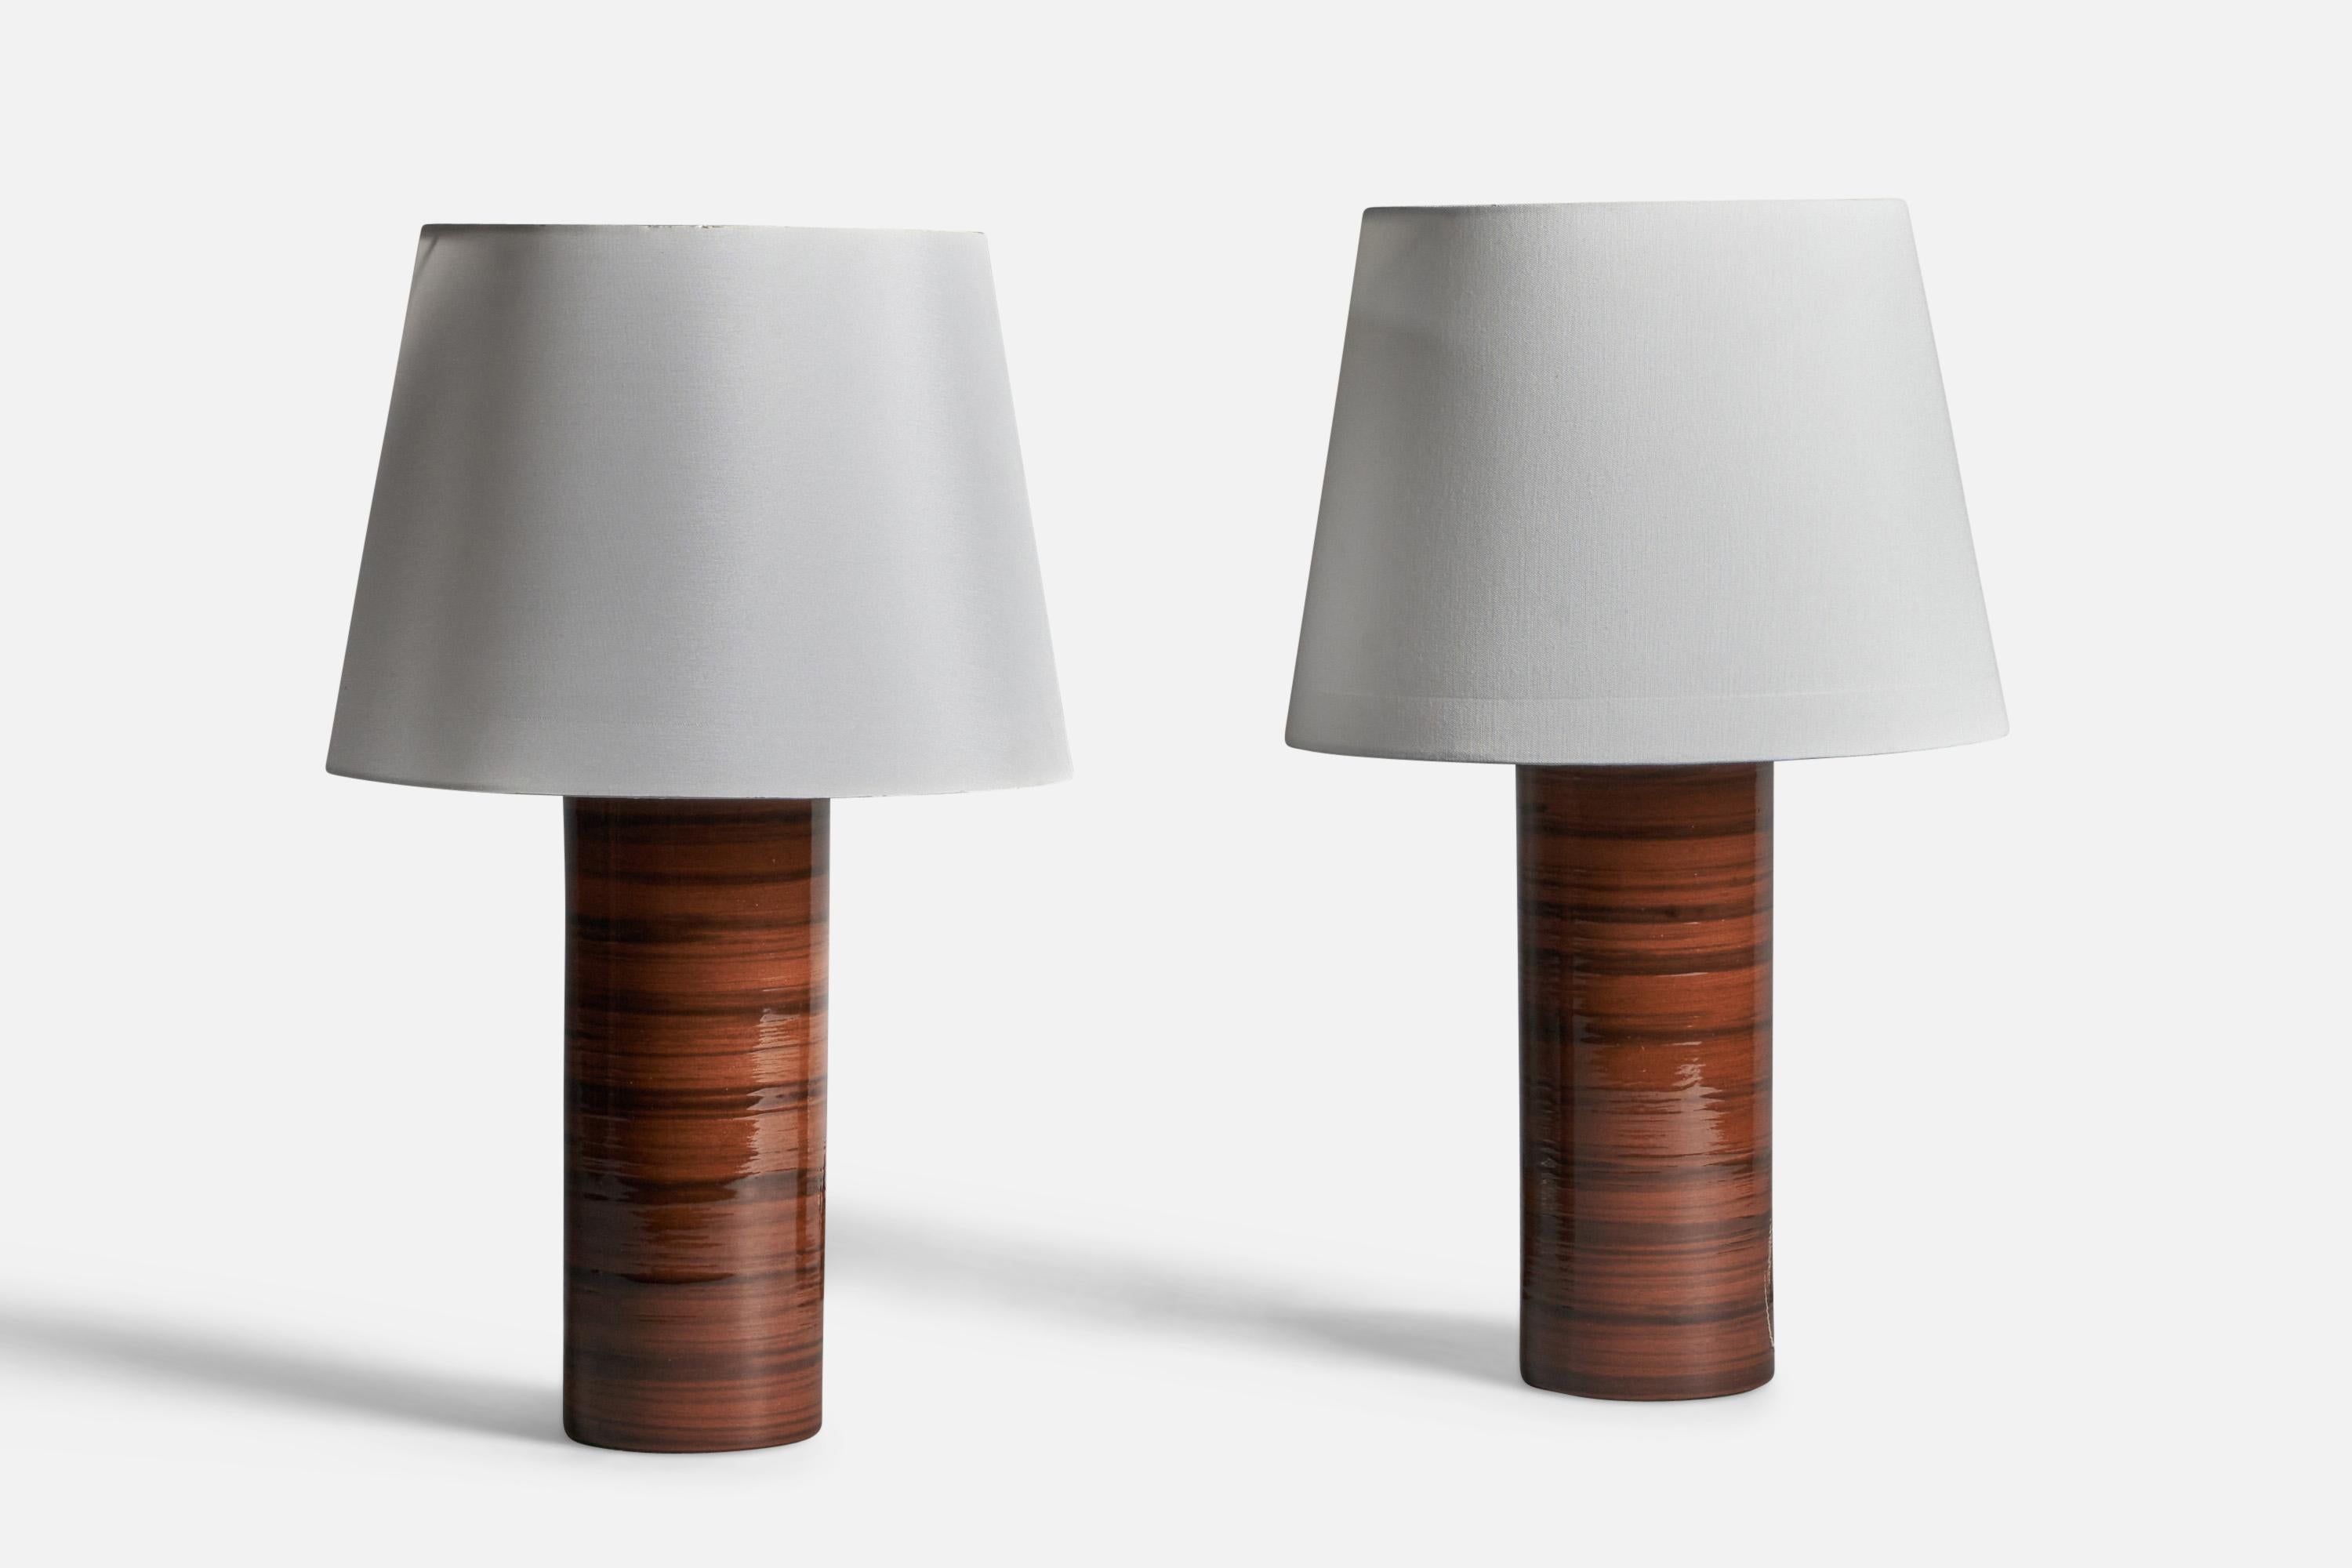 A pair of brown and black-glazed stoneware table lamps, designed and produced in Sweden, 1960s.

Dimensions of Lamp (inches): 14.5